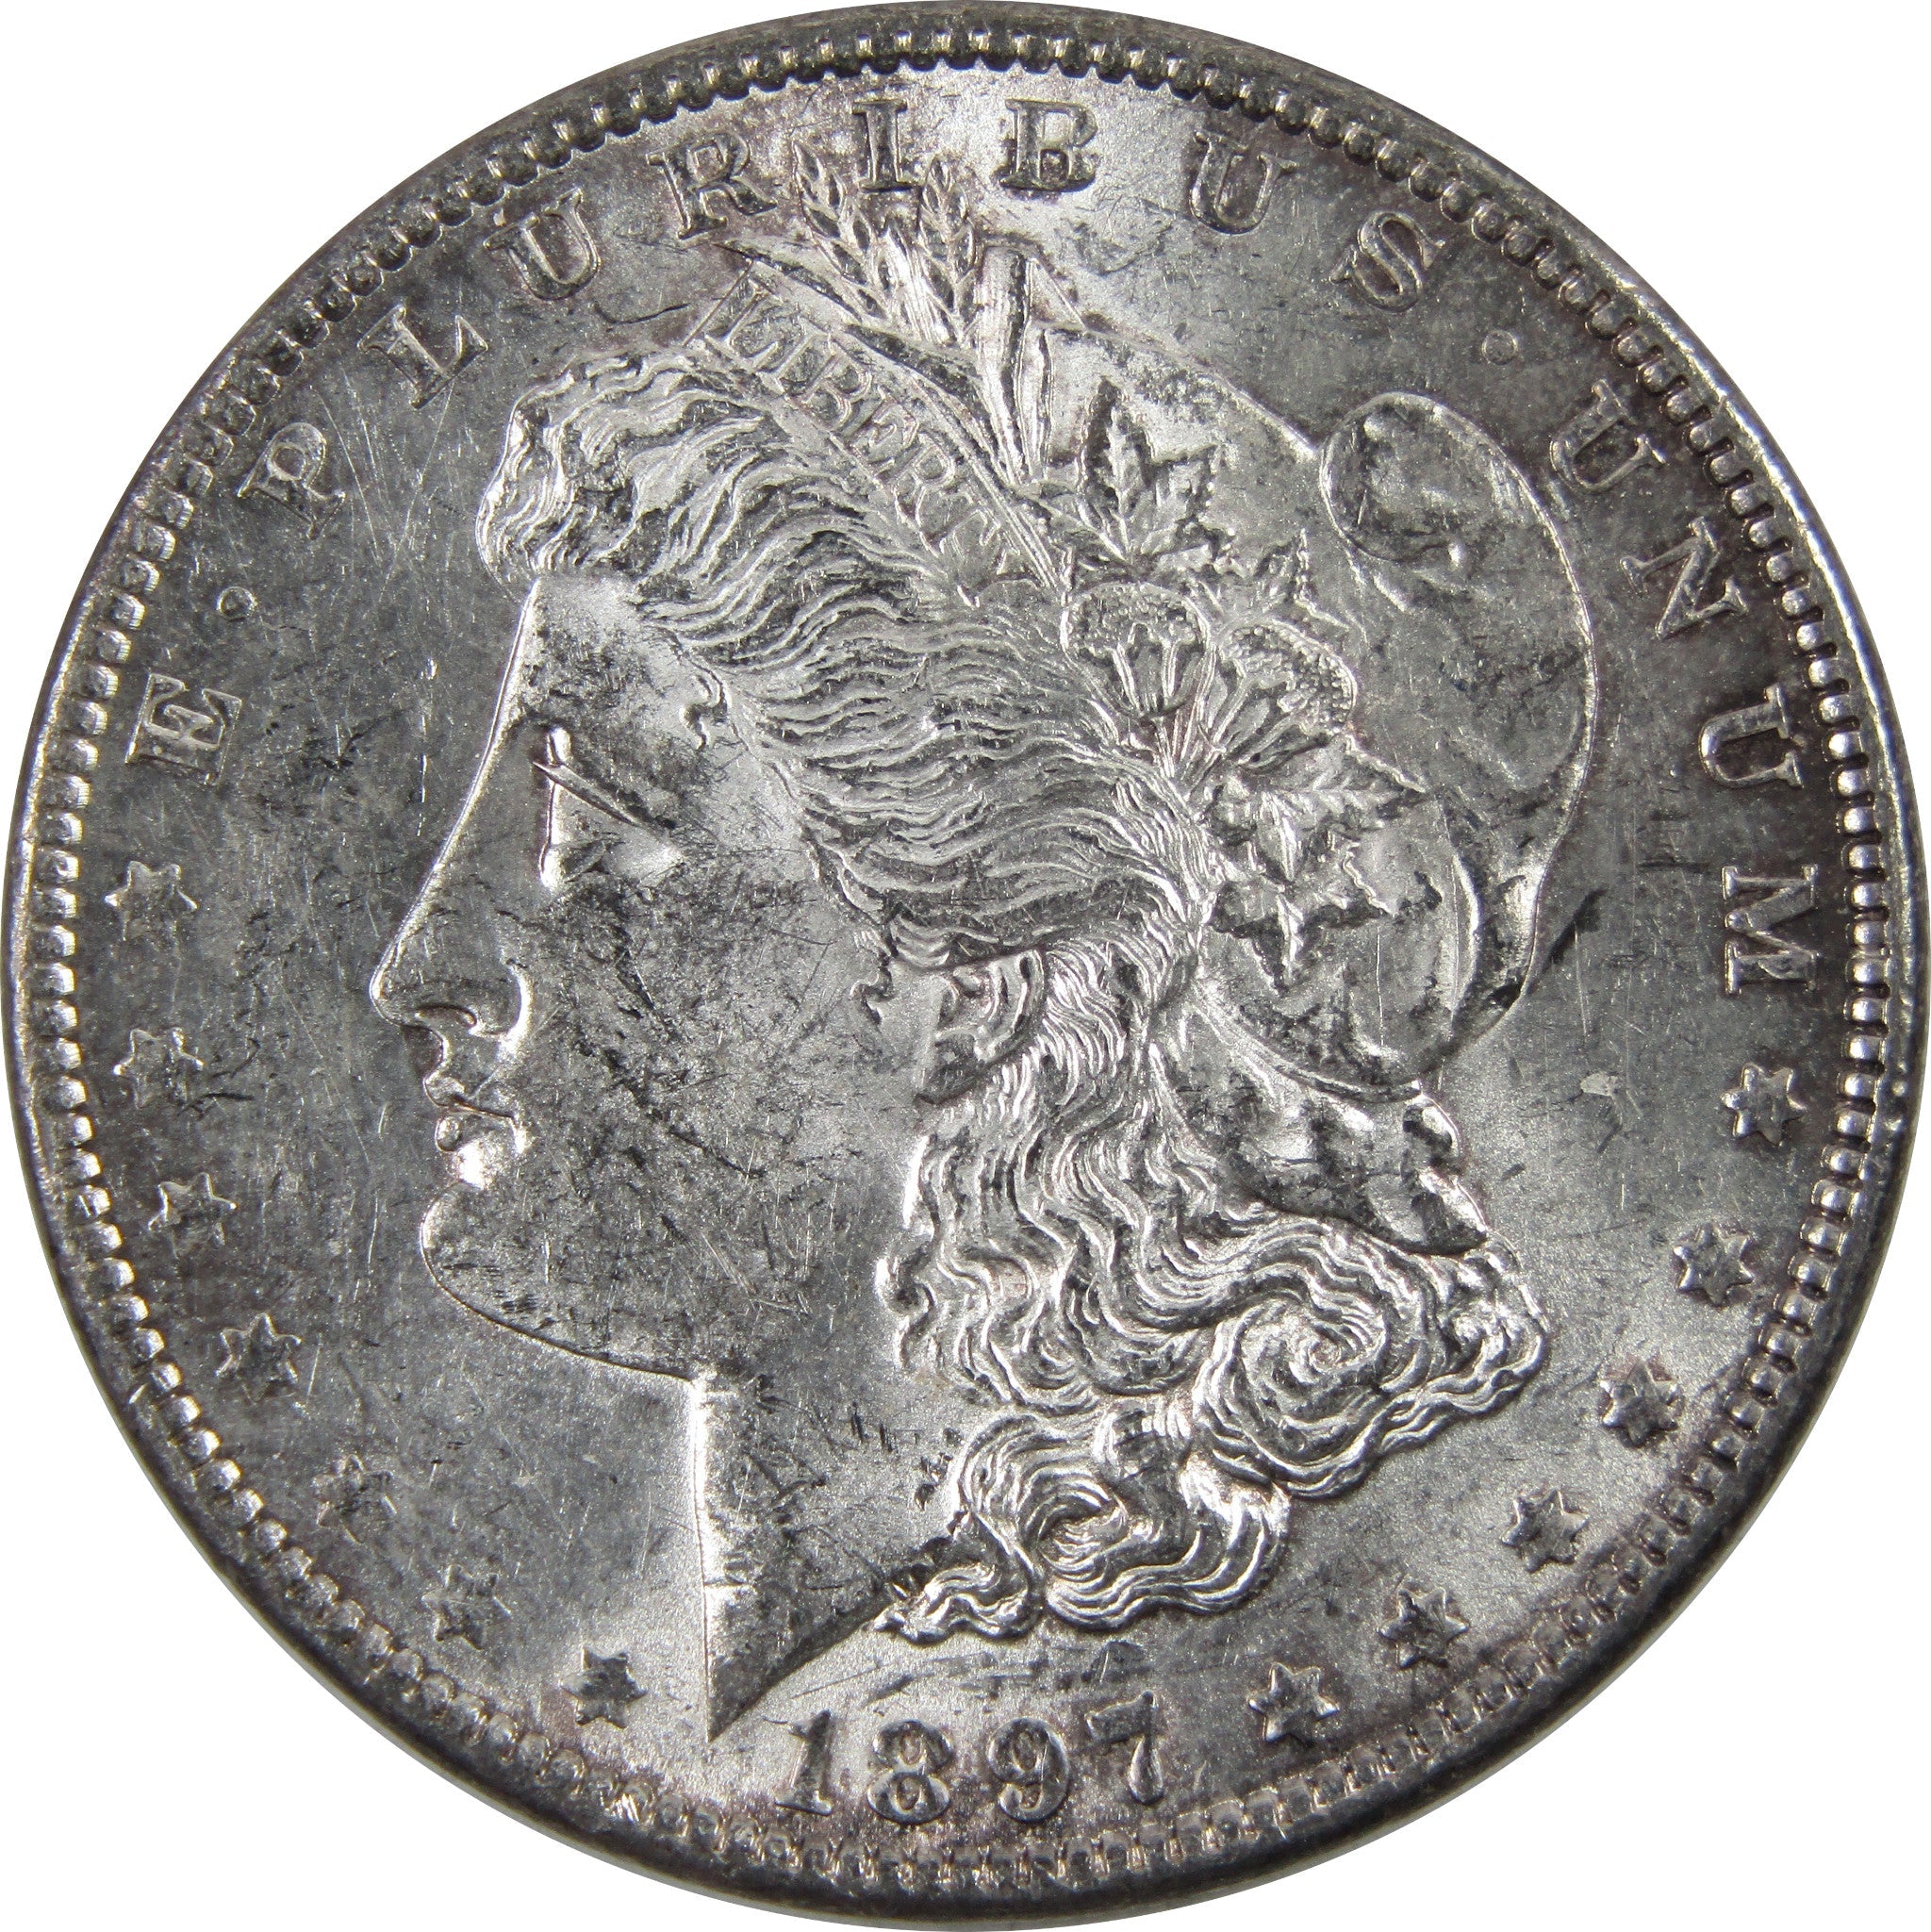 1897 Morgan Dollar AU About Uncirculated 90% Silver $1 Coin SKU:I5523 - Morgan coin - Morgan silver dollar - Morgan silver dollar for sale - Profile Coins &amp; Collectibles